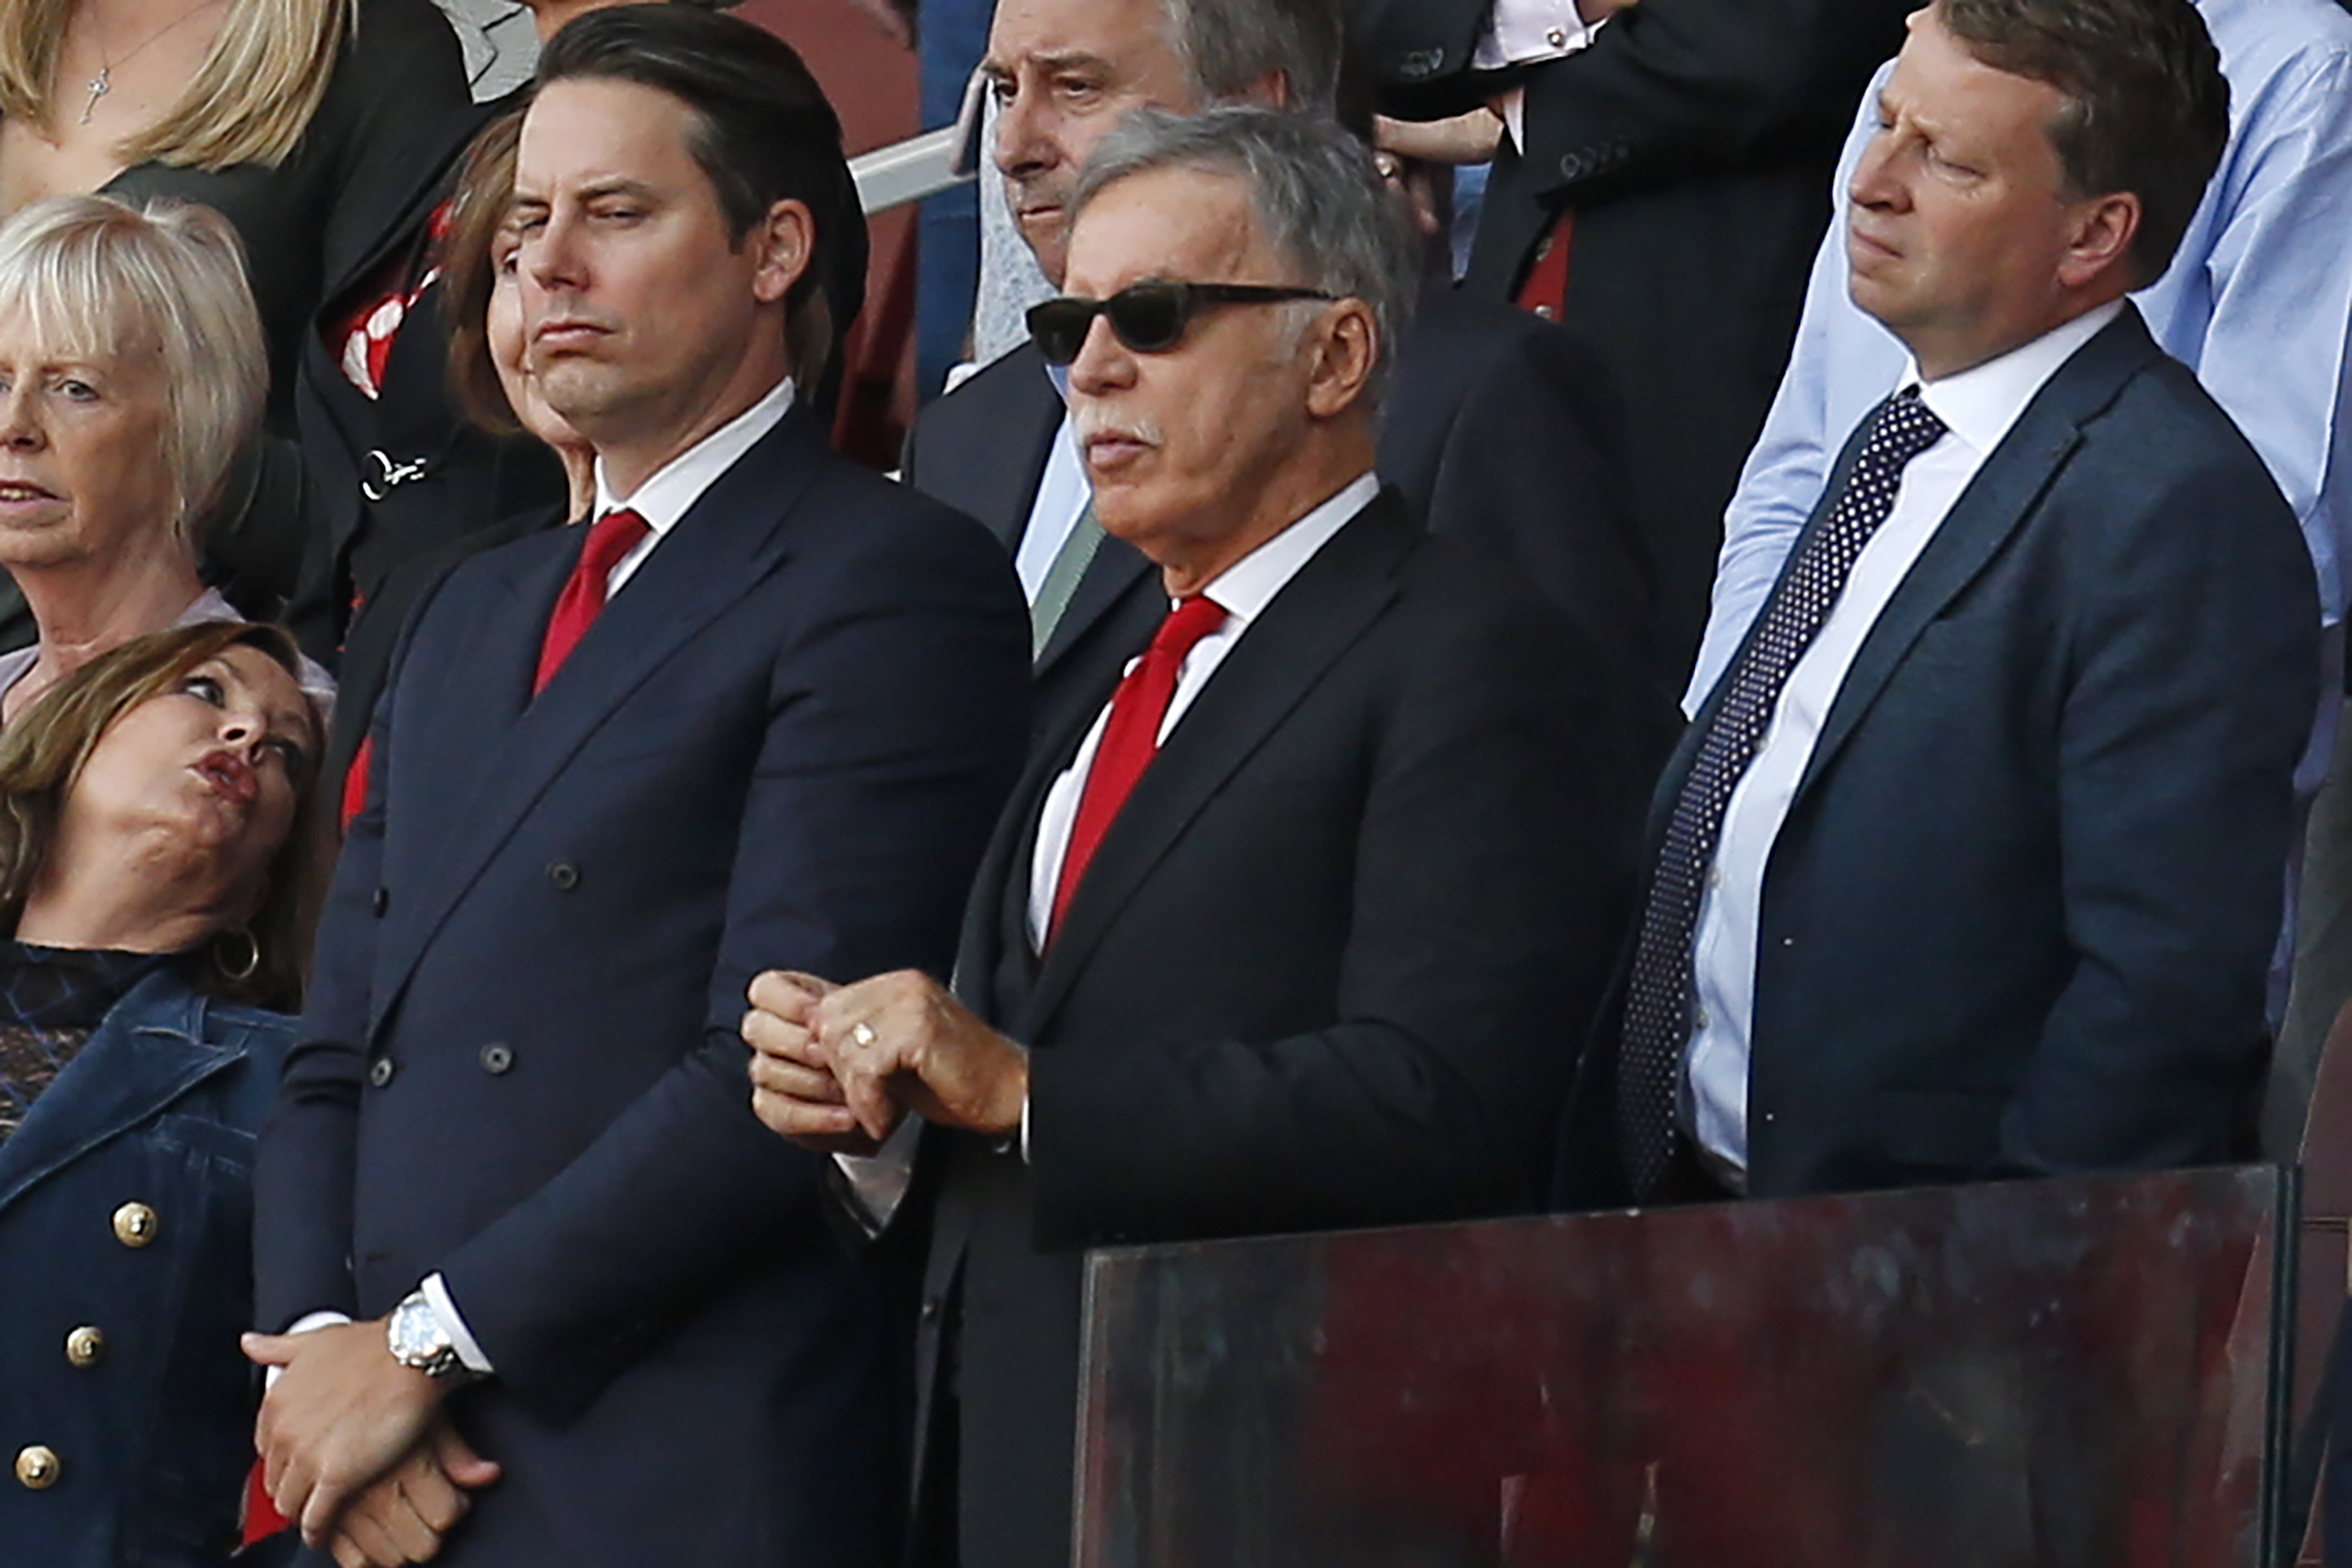 Arsenal's US owner Stan Kroenke (C) looks on during the presentation to Arsenal's French manager Arsene Wenger after the English Premier League football match between Arsenal and Burnley at the Emirates Stadium in London on May 6, 2018. (Photo by Ian KINGTON / IKIMAGES / AFP) / RESTRICTED TO EDITORIAL USE. No use with unauthorized audio, video, data, fixture lists, club/league logos or 'live' services. Online in-match use limited to 45 images, no video emulation. No use in betting, games or single club/league/player publications. /         (Photo credit should read IAN KINGTON/AFP/Getty Images)